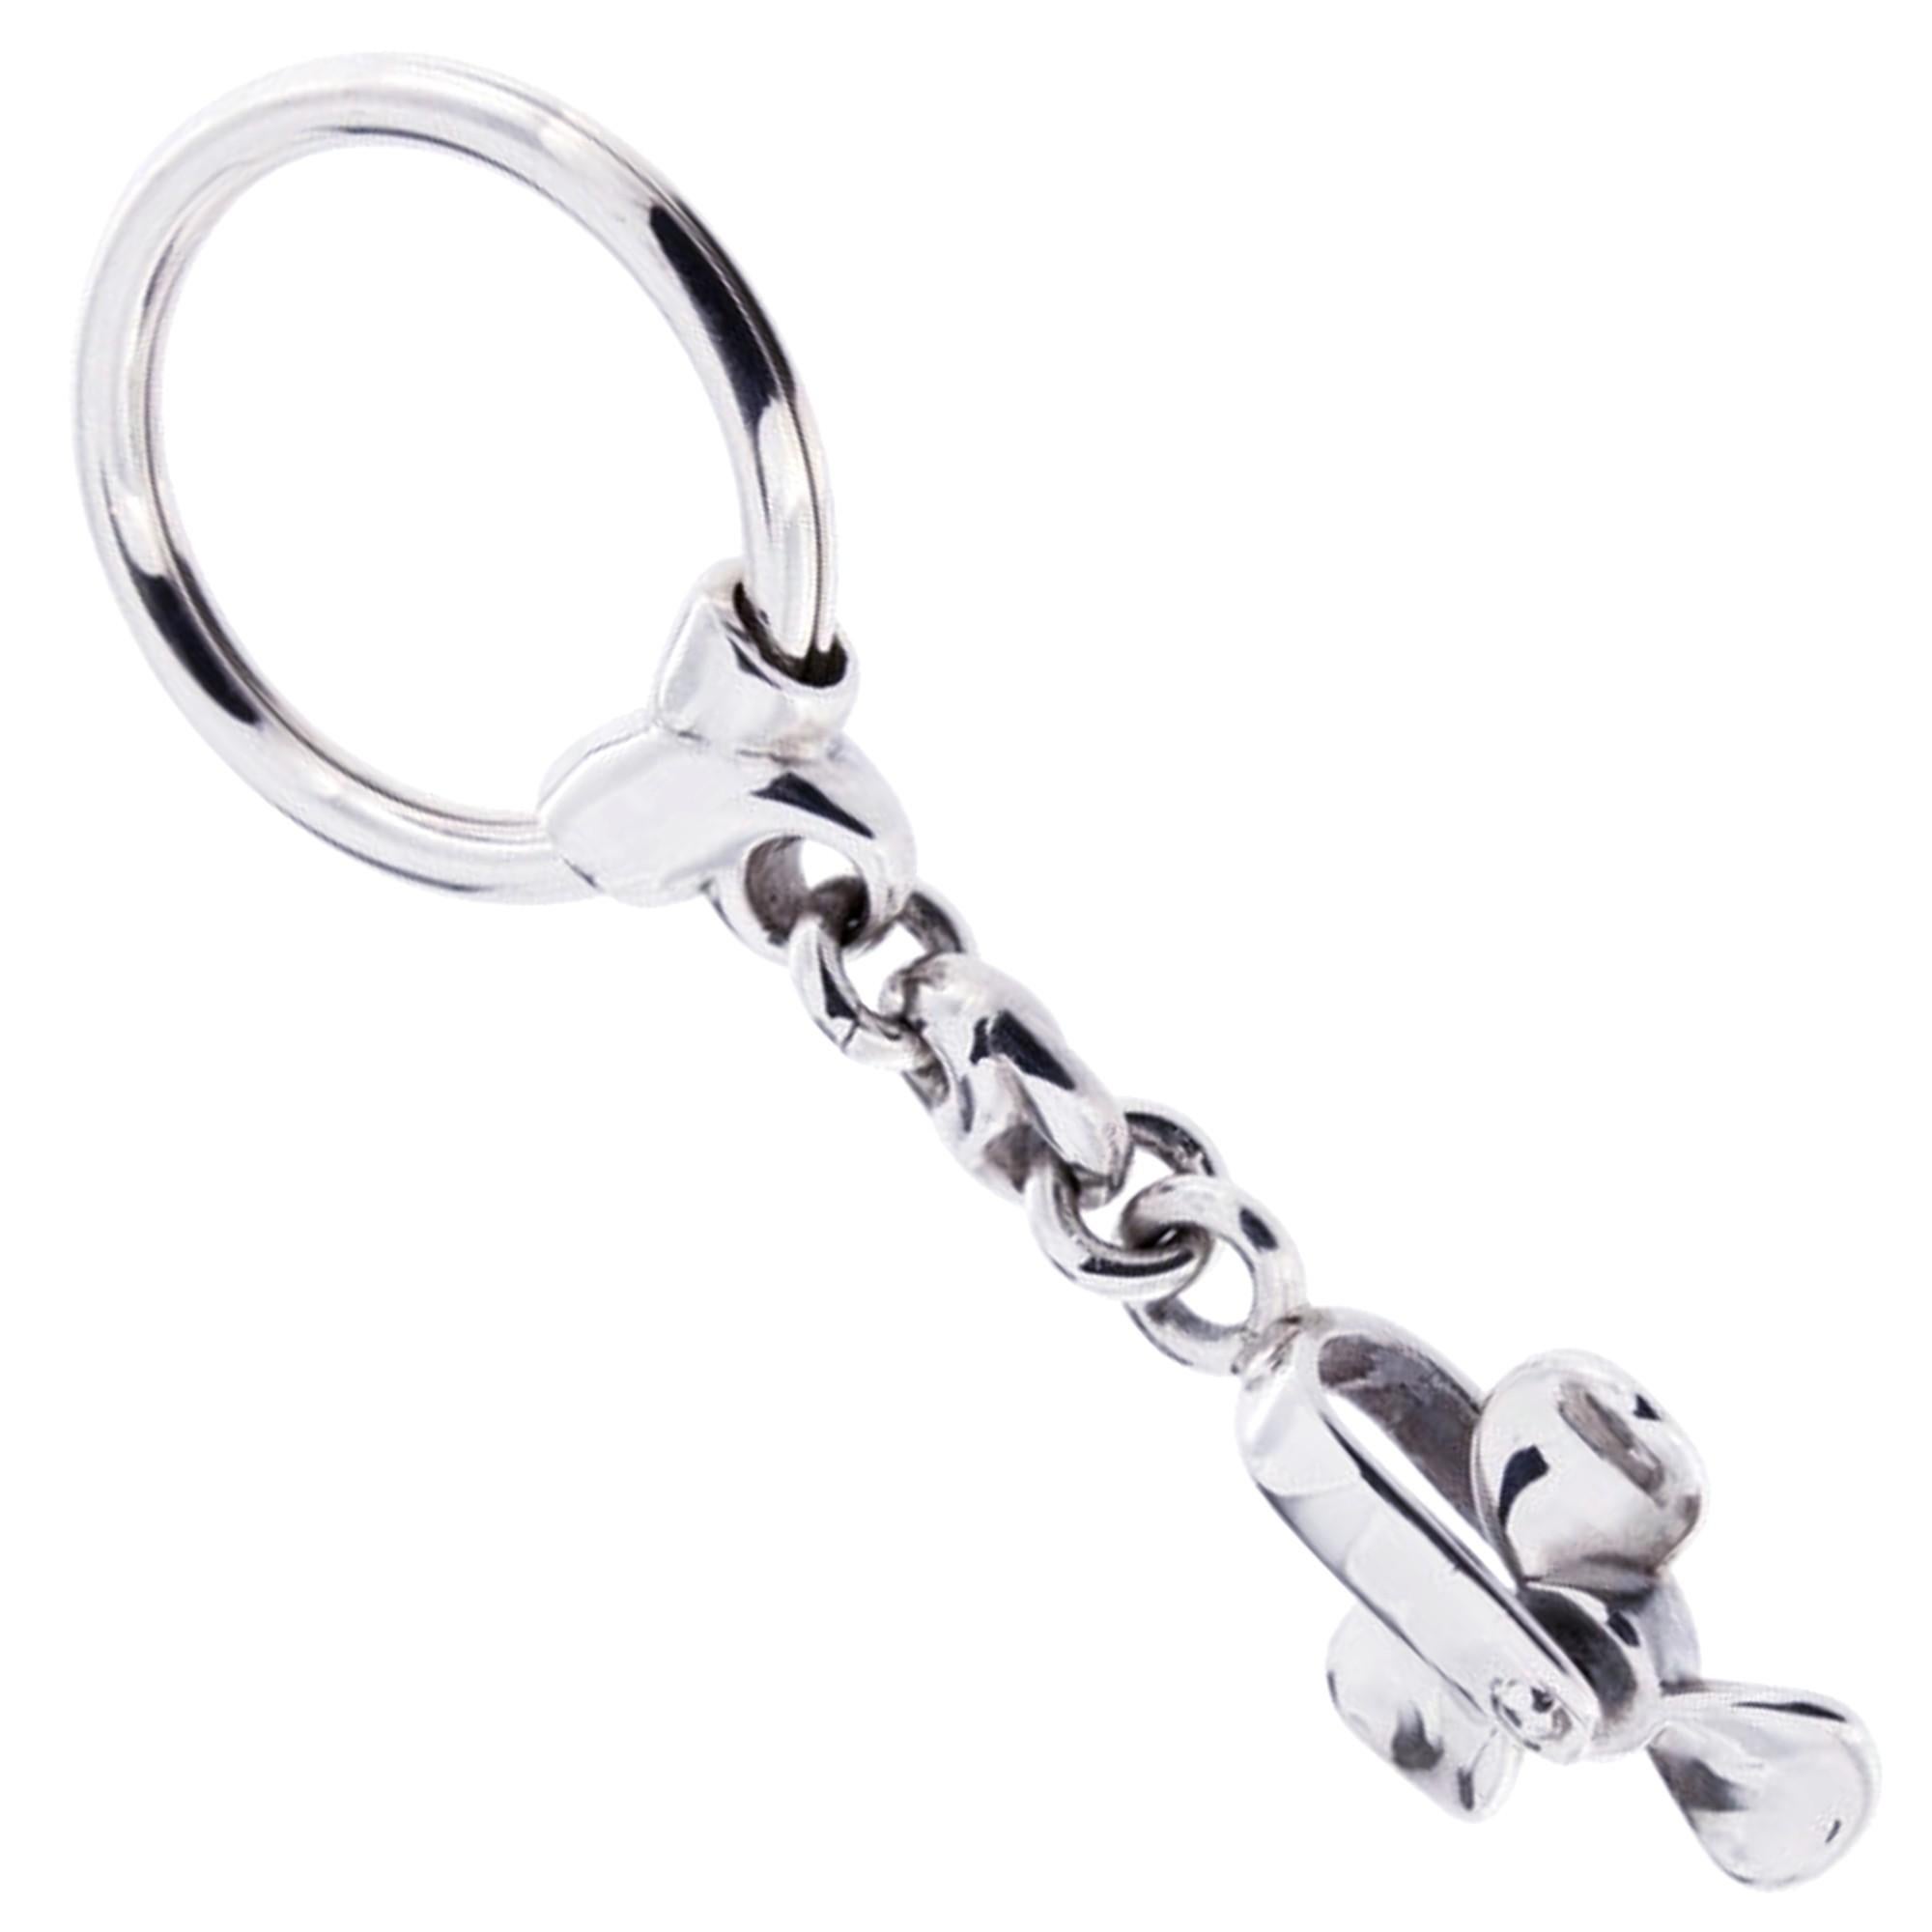 Alex Jona design collection, hand crafted in Italy, rhodium plated Sterling Silver propeller key holder. Propeller dimensions : Diameter 0.84 in/ 21.41 mm x Depth: 0.33 in./ 8.39 mm

Alex Jona gifts stand out, not only for their special design and